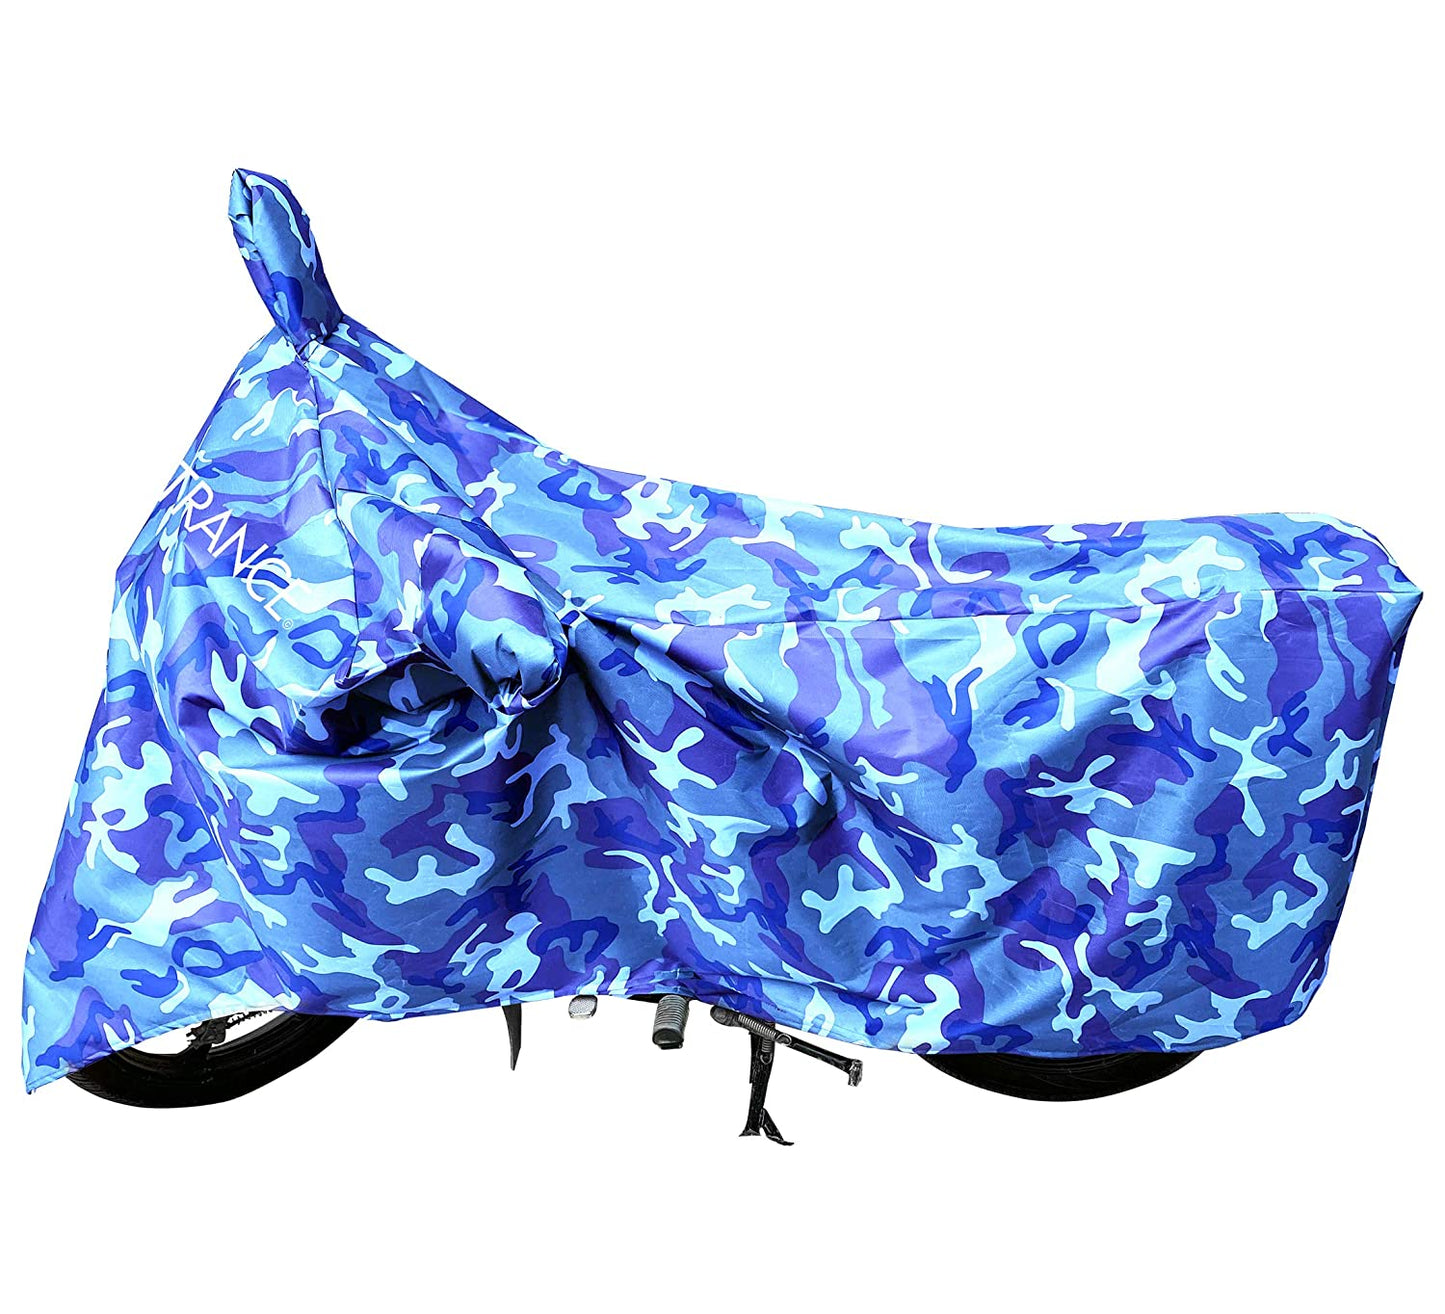 MotoTrance Jungle Bike Body Covers For Yamaha Saluto RX - Interlock-Stitched Waterproof and Heat Resistant with Mirror Pockets